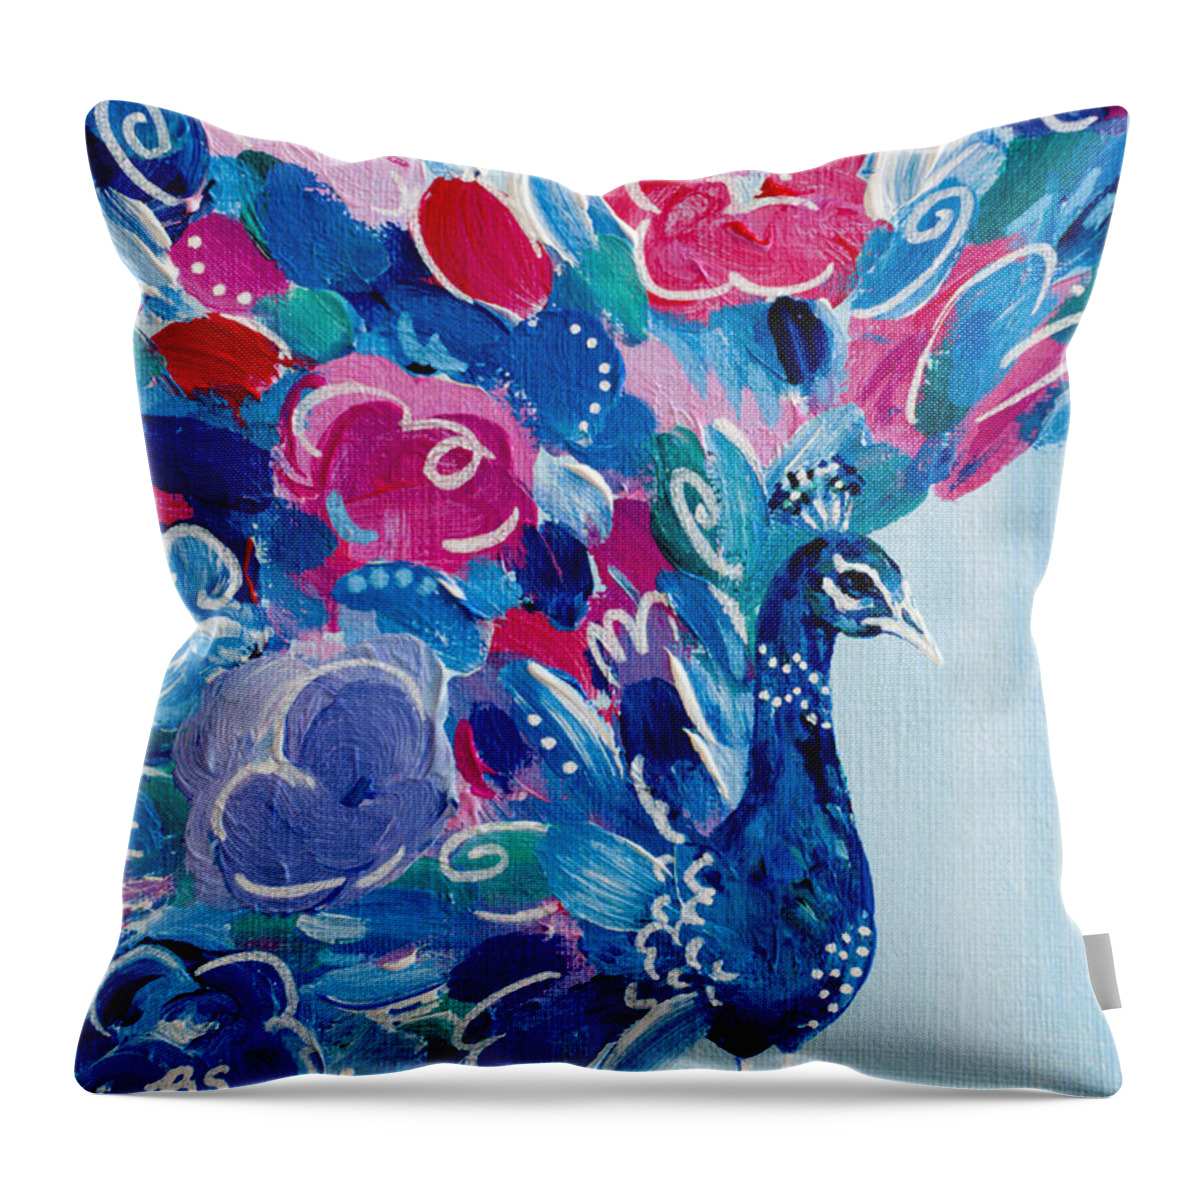 Peacock Throw Pillow featuring the painting Party Animal by Beth Ann Scott